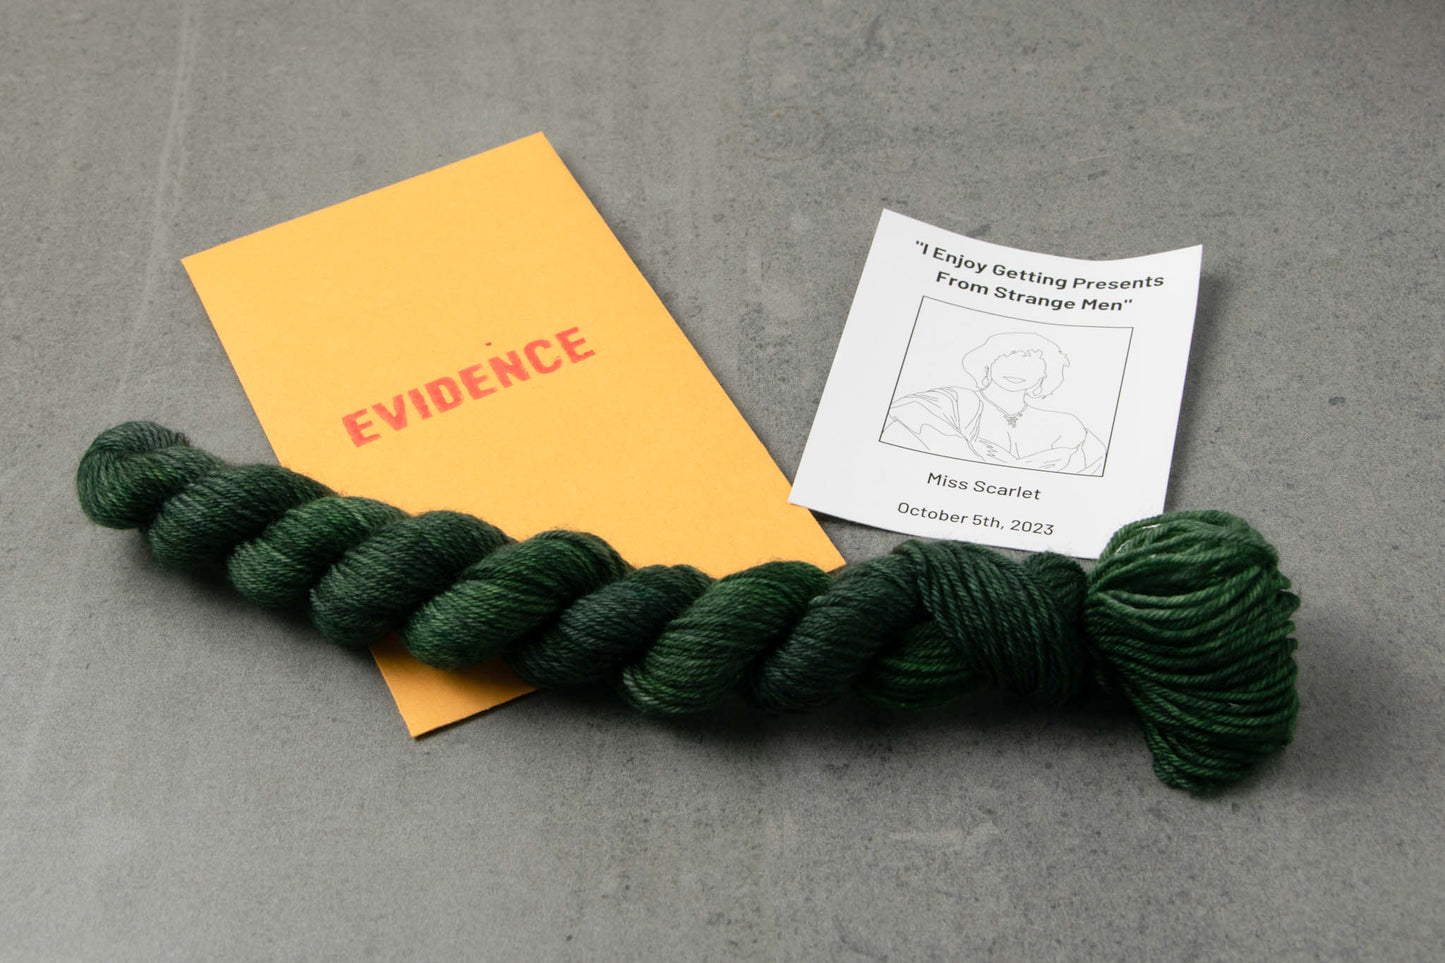 A skein of deep green on top of an envelope stamped with "Evidence" and a card with a drawing of Miss Scarlet on it.